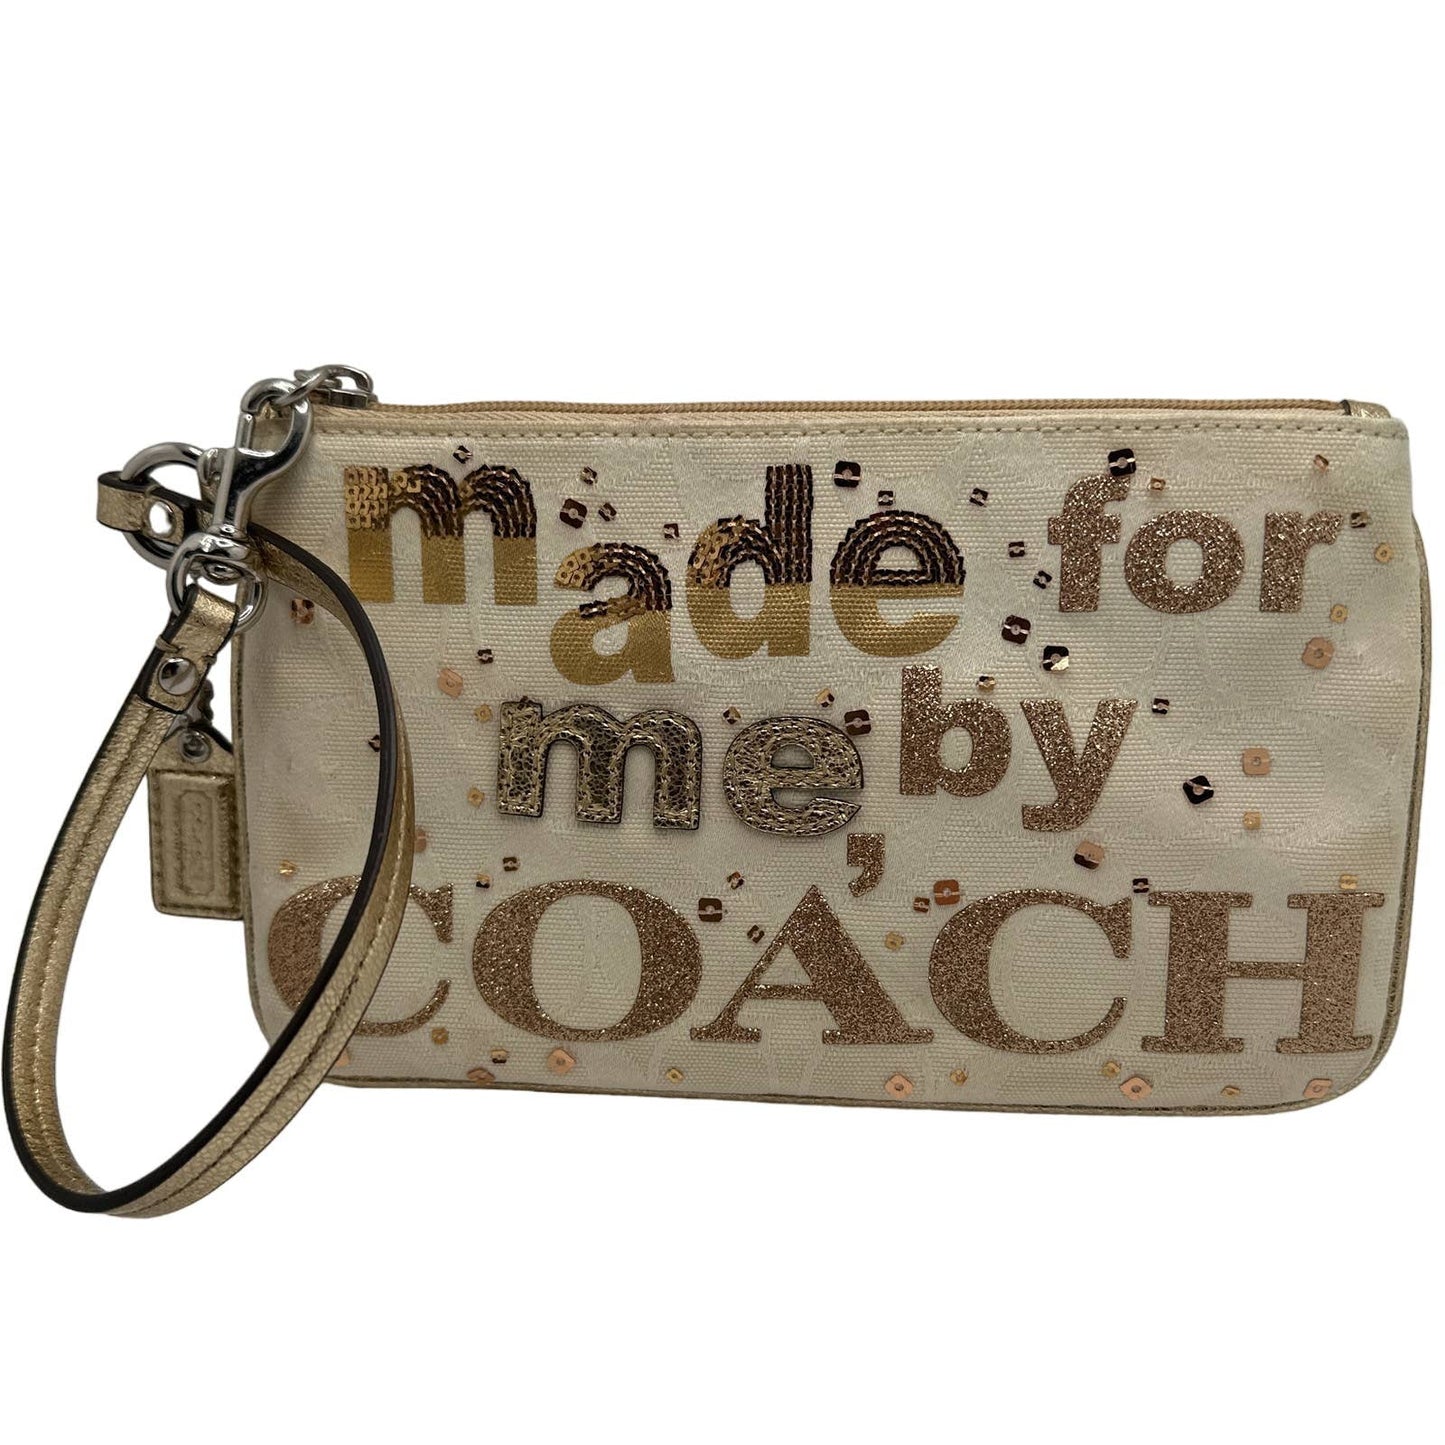 COACH Poppy Made for me by Coach Wristlet